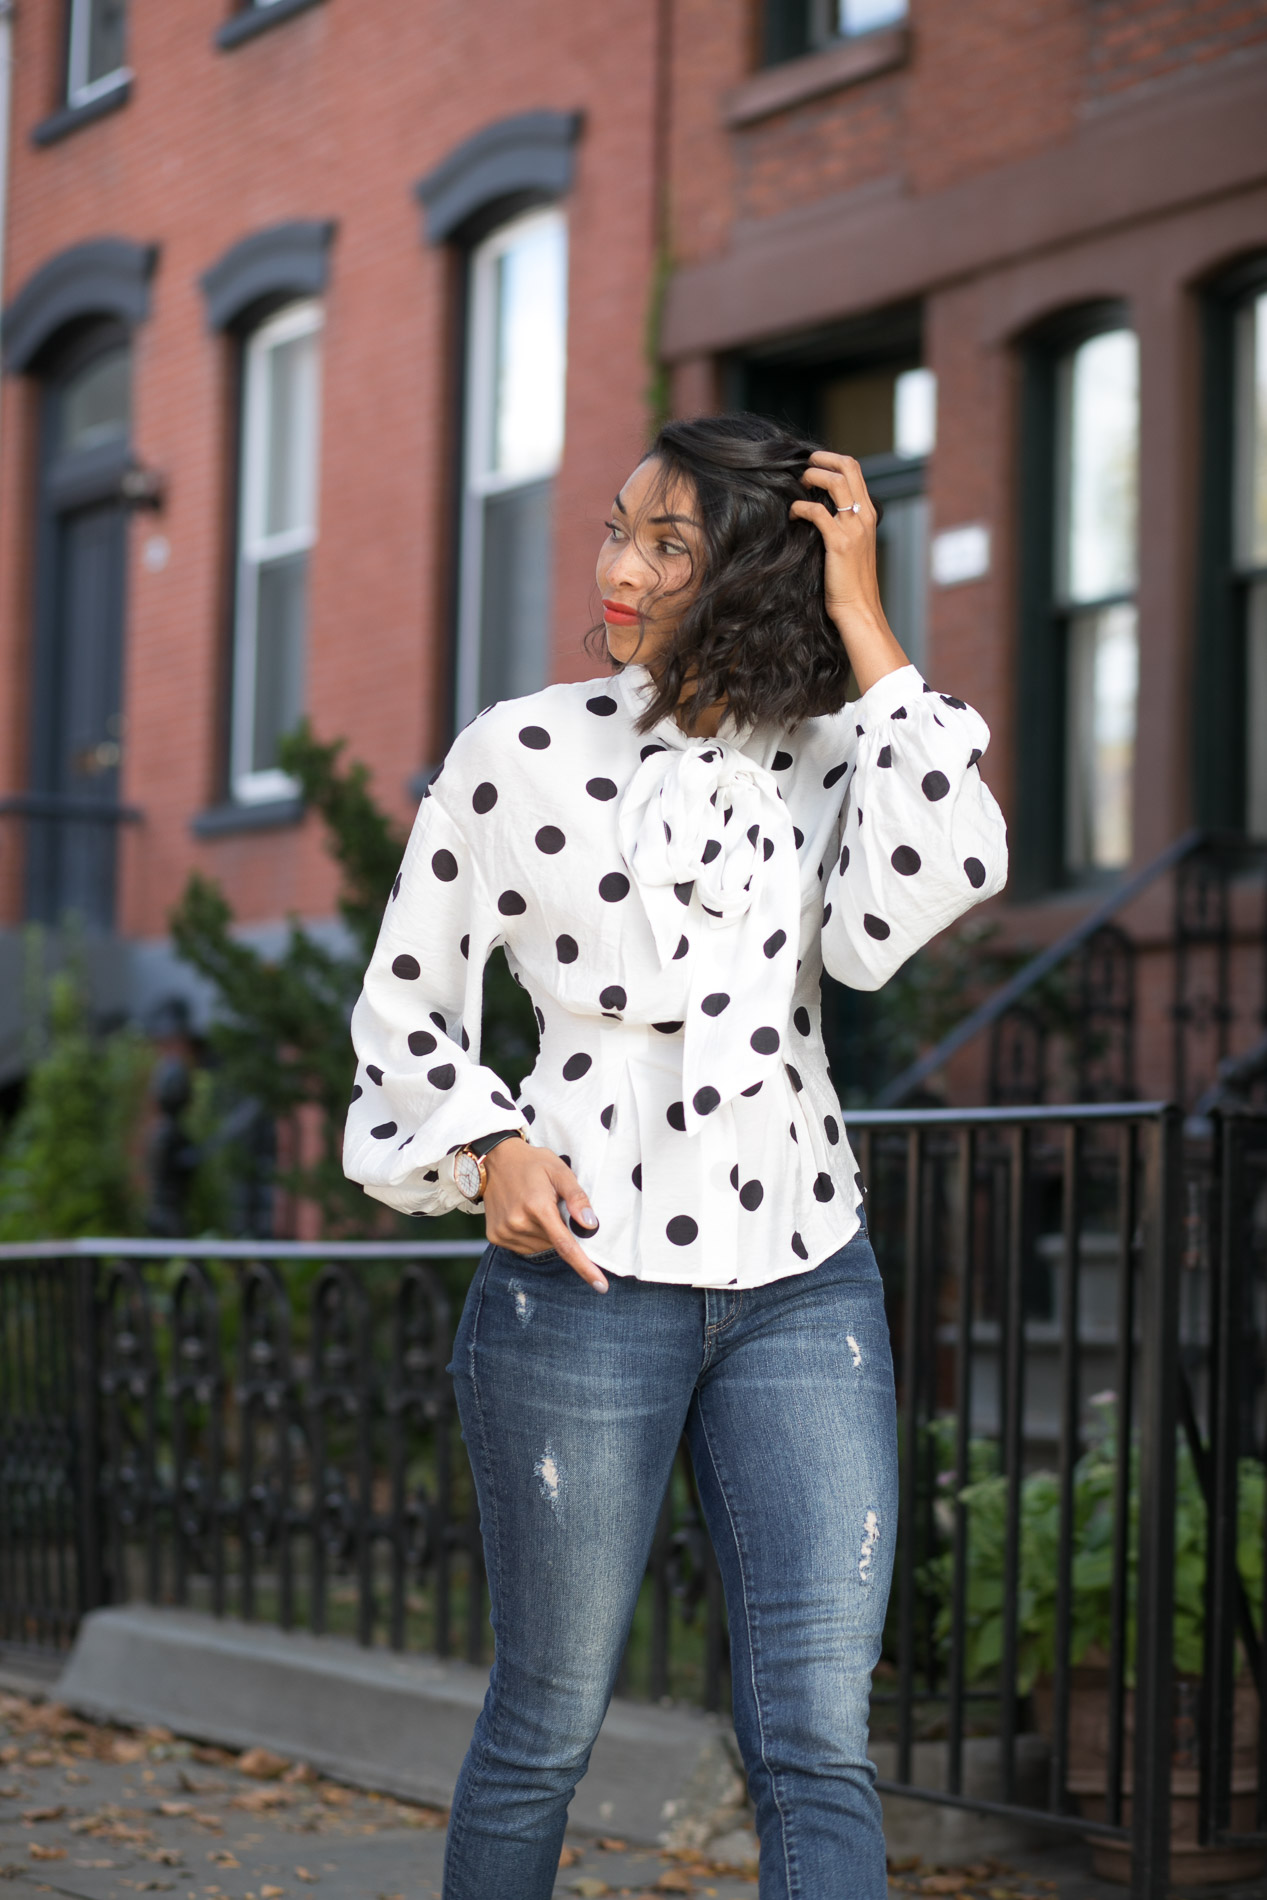 Are Polka Dots The New Stripes? | Love Fashion & Friends